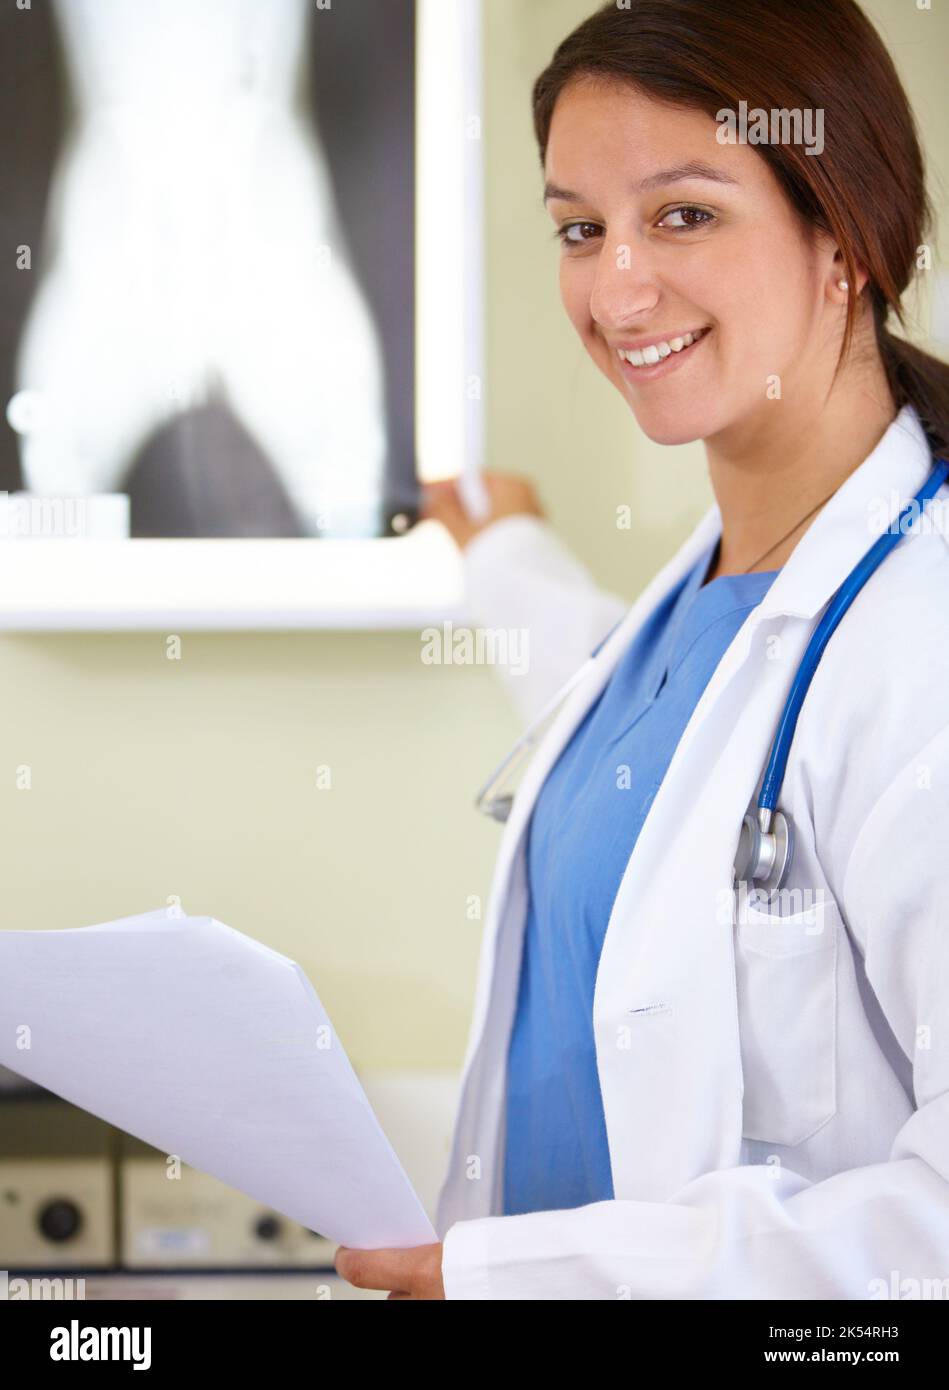 Pointing out the solution to the problem -X-Ray. Portrait of a young female in the medical profession pointing at an x-ray. Stock Photo